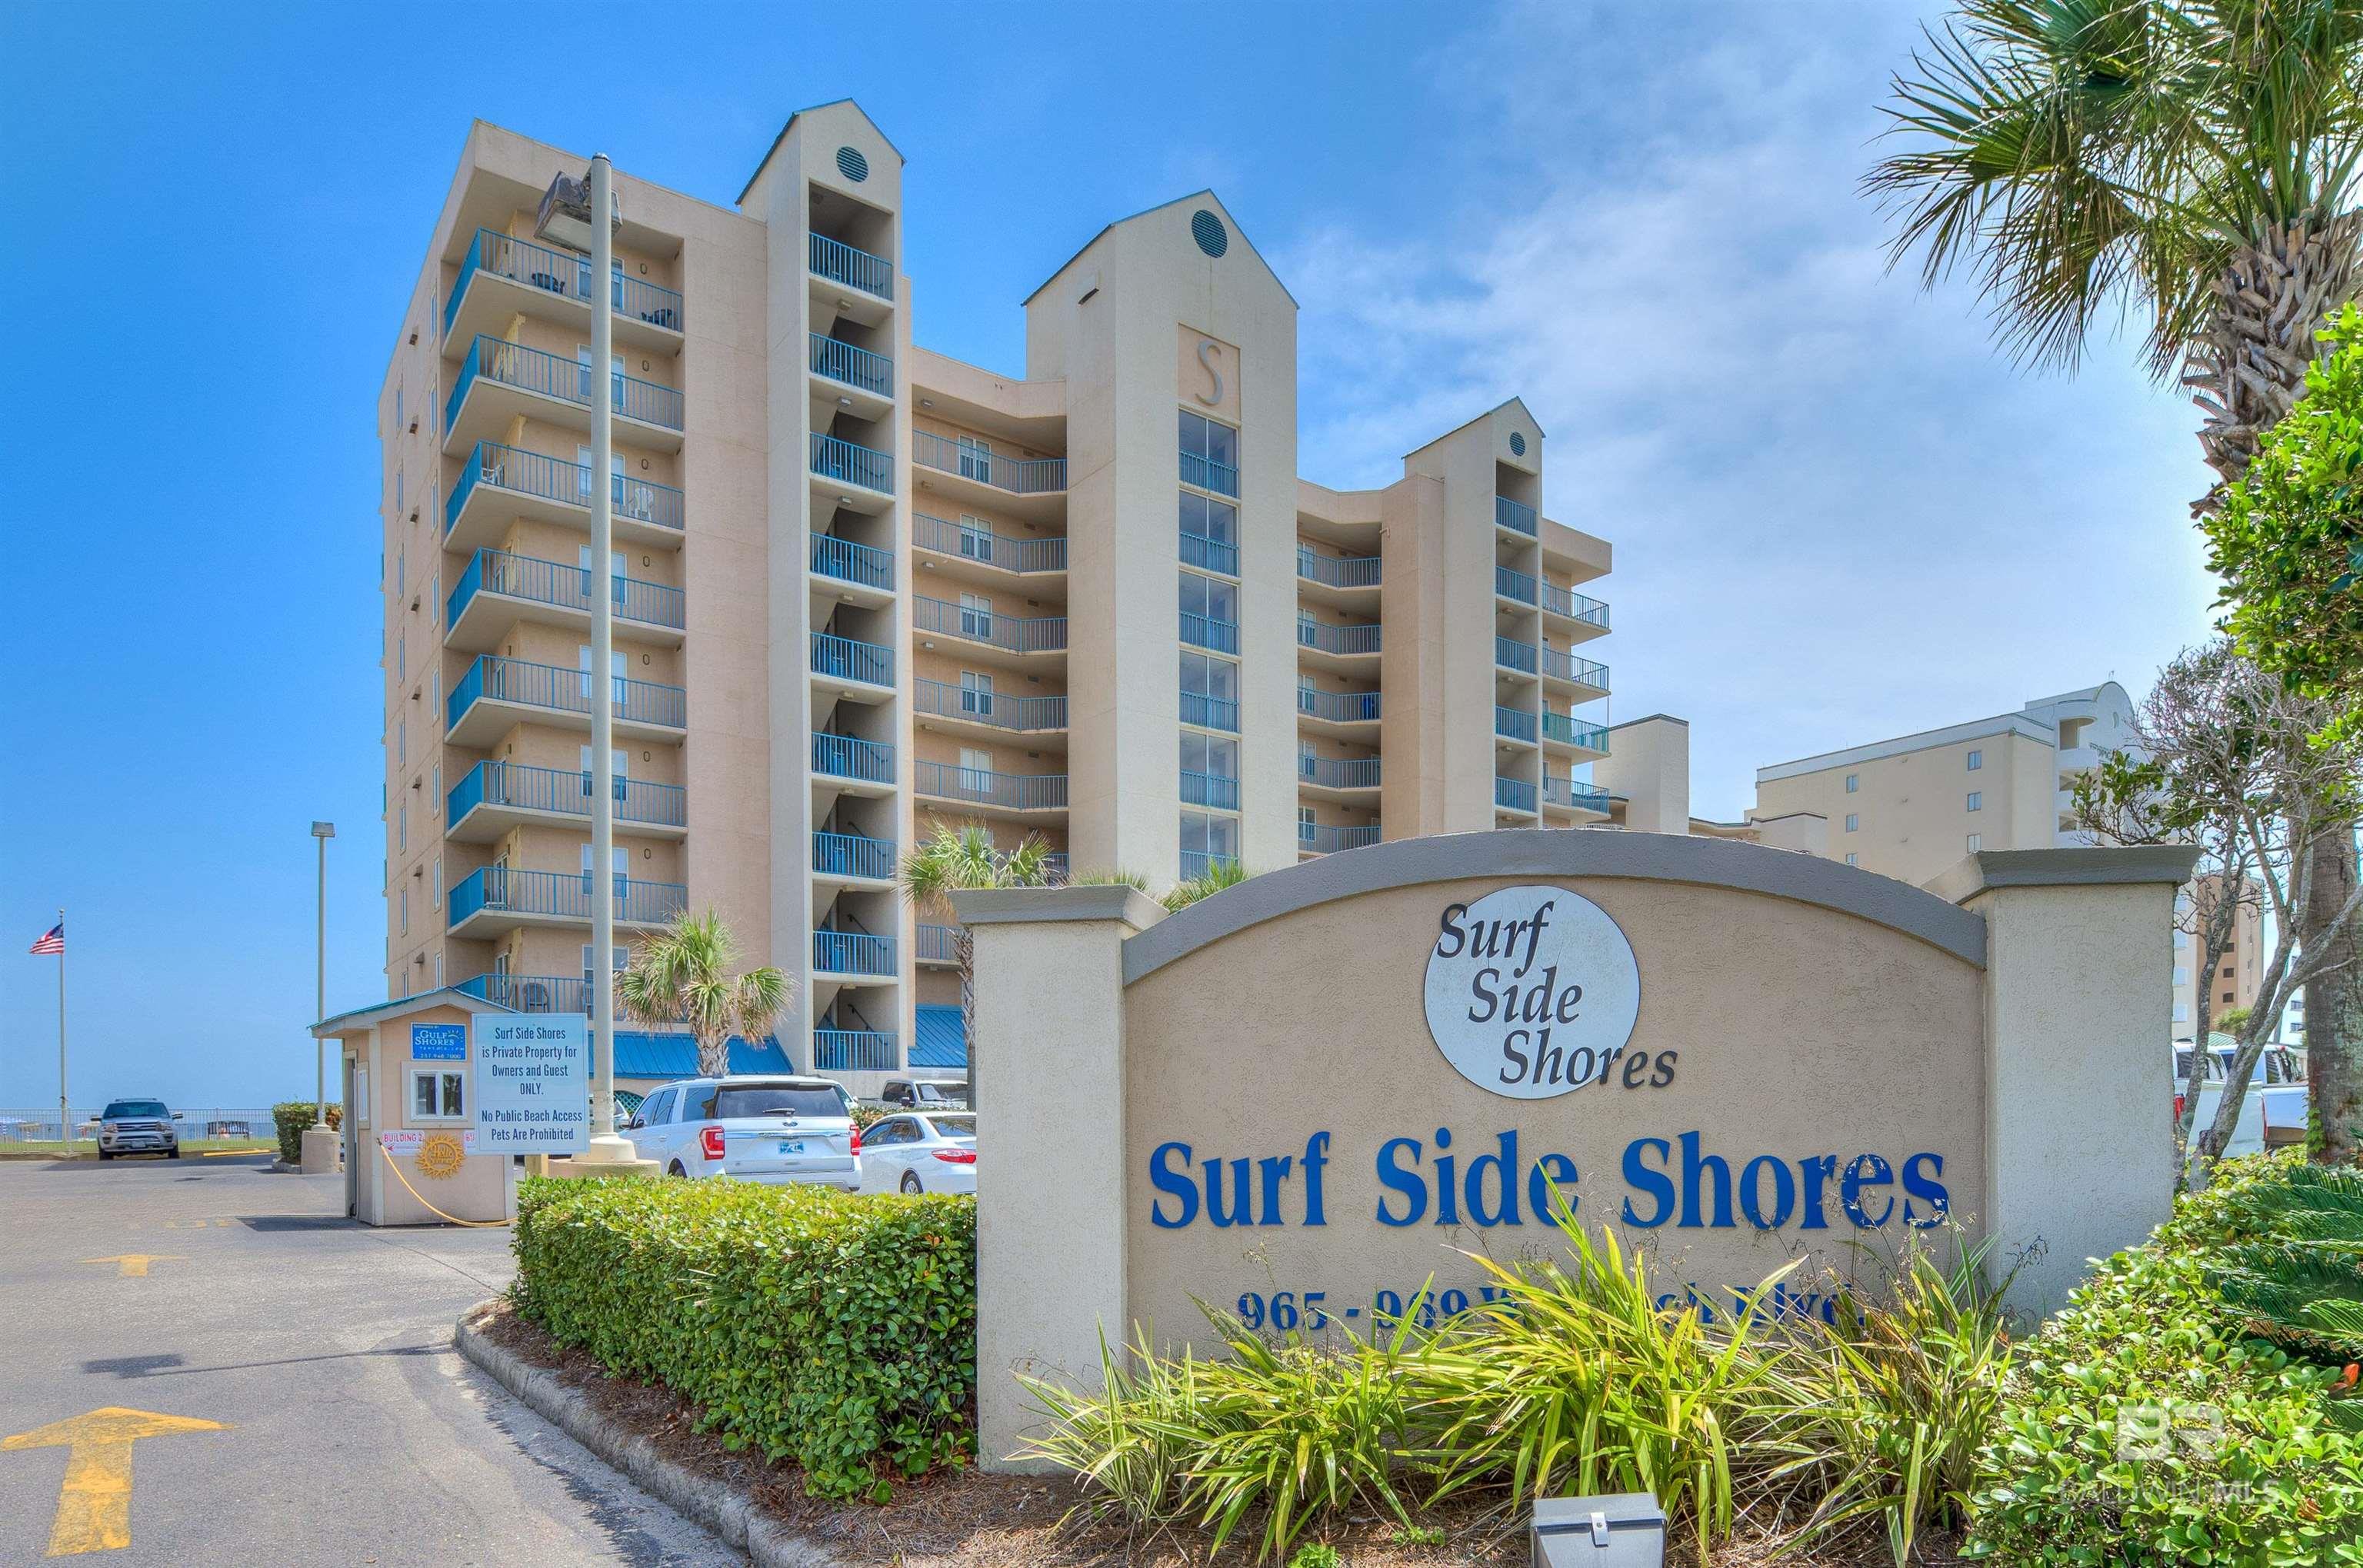 PRICE REDUCED BY 26,000. NEW PRICE $ 649,000.00. RARE 3/3 EAST CORNER GULF FRONT UNIT. PRIME 2ND FLOOR VIEW OF THE GULF & BEACH, PALM TREES AND POOL AREA. LOWER FLOORS ALSO GOOD FOR RENTALS. COMPLETELY FURNISHED AND RENT READY. UNIT HAS BEEN UPGRADED, GRANITE KITCHEN AND BATH COUNTER TOPS, VINYL FLOORS. UNIT ALSO HAS REAR BALCONY. THIS UNIT WILL NOT LAST LONG, COME TAKE A LOOK!  PRICE REDUCED BY $ 26,000 NEW PRICE  $ 649,000.00.